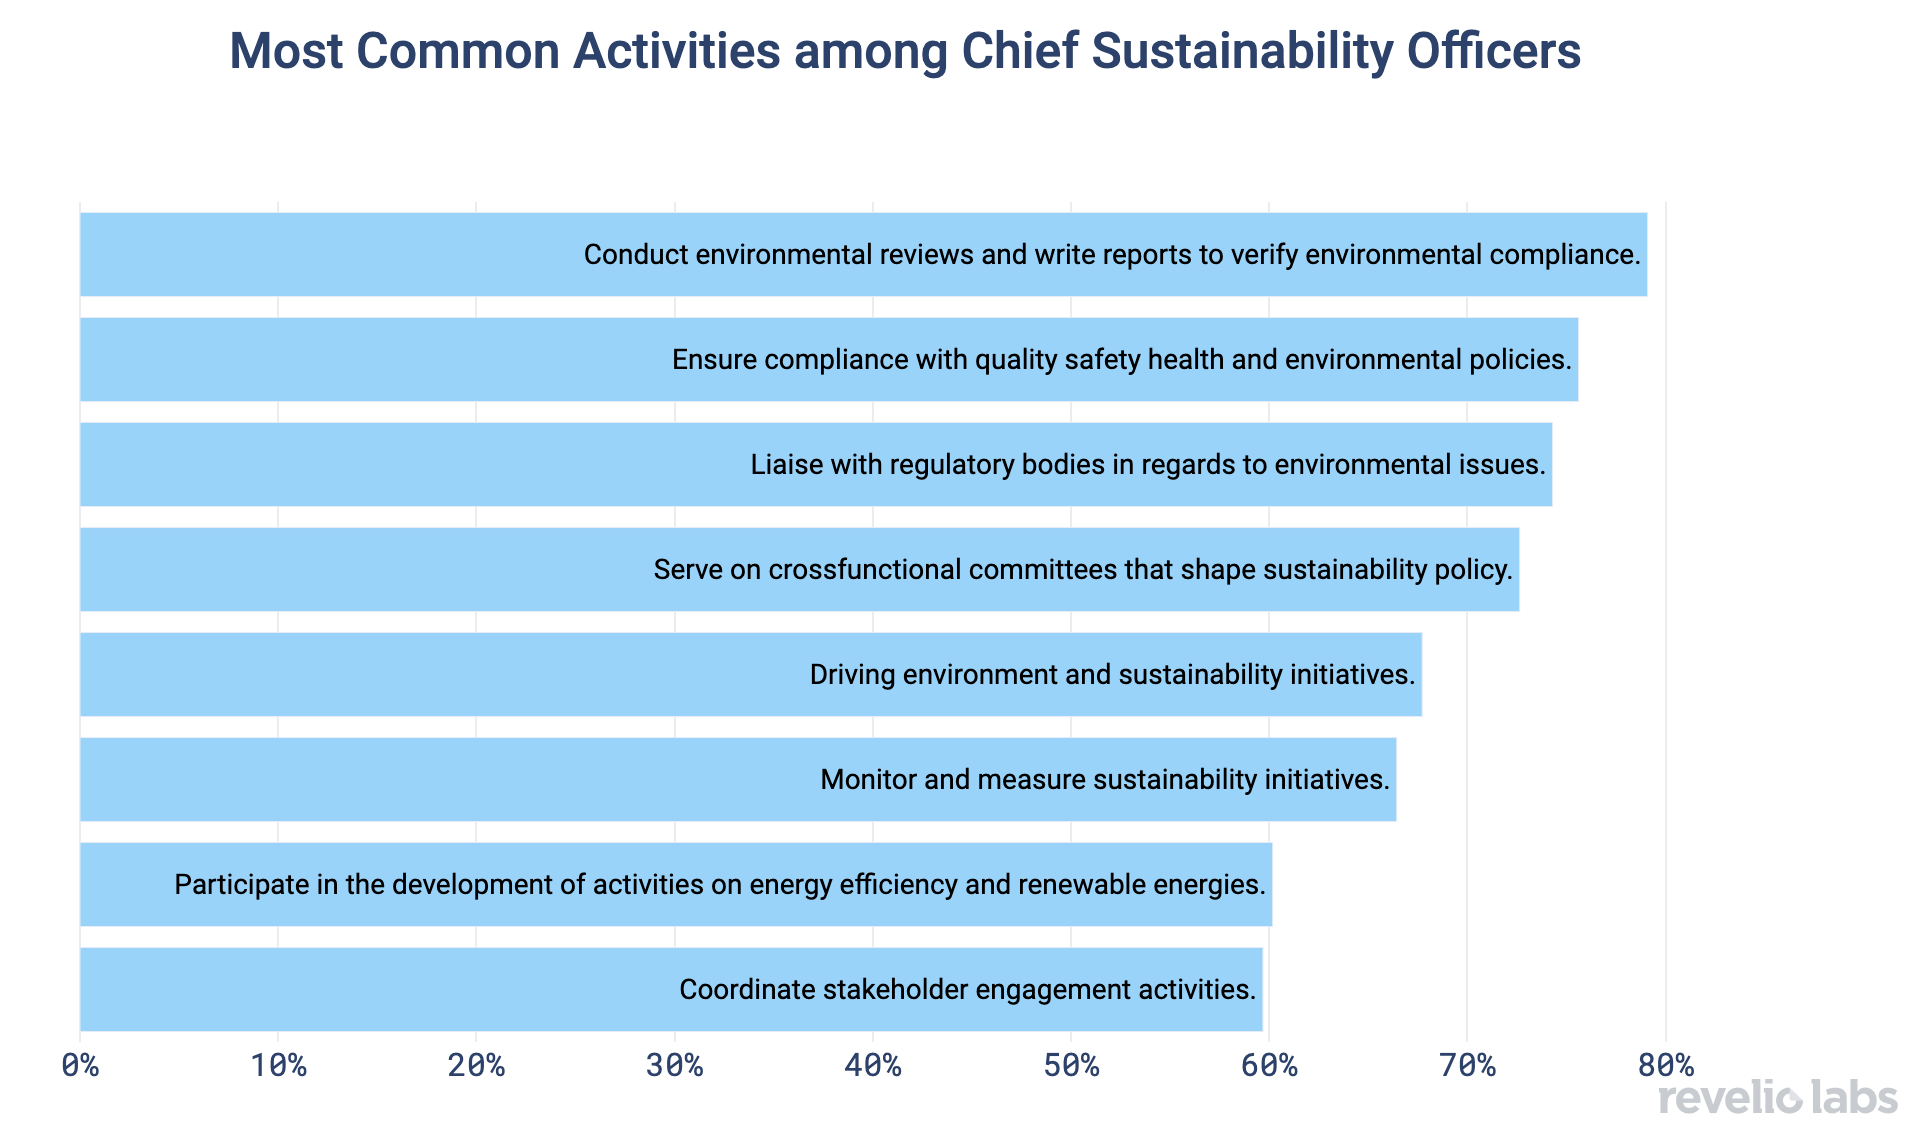 Most Common Activities among Chief Sustainbility Officers